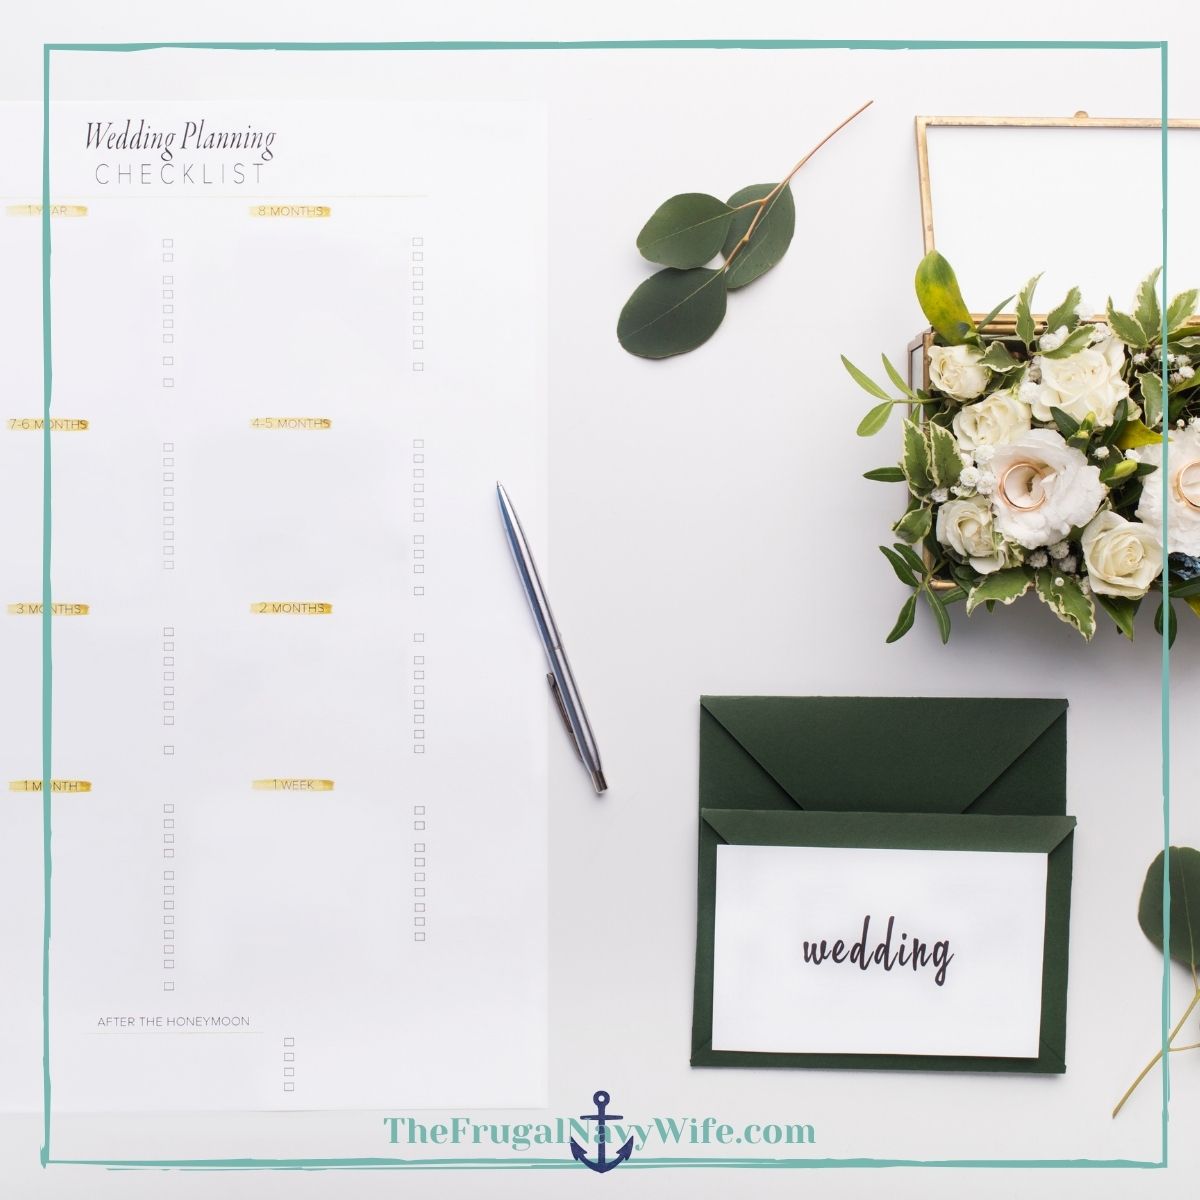 huge-list-of-free-wedding-samples-for-brides-the-frugal-navy-wife